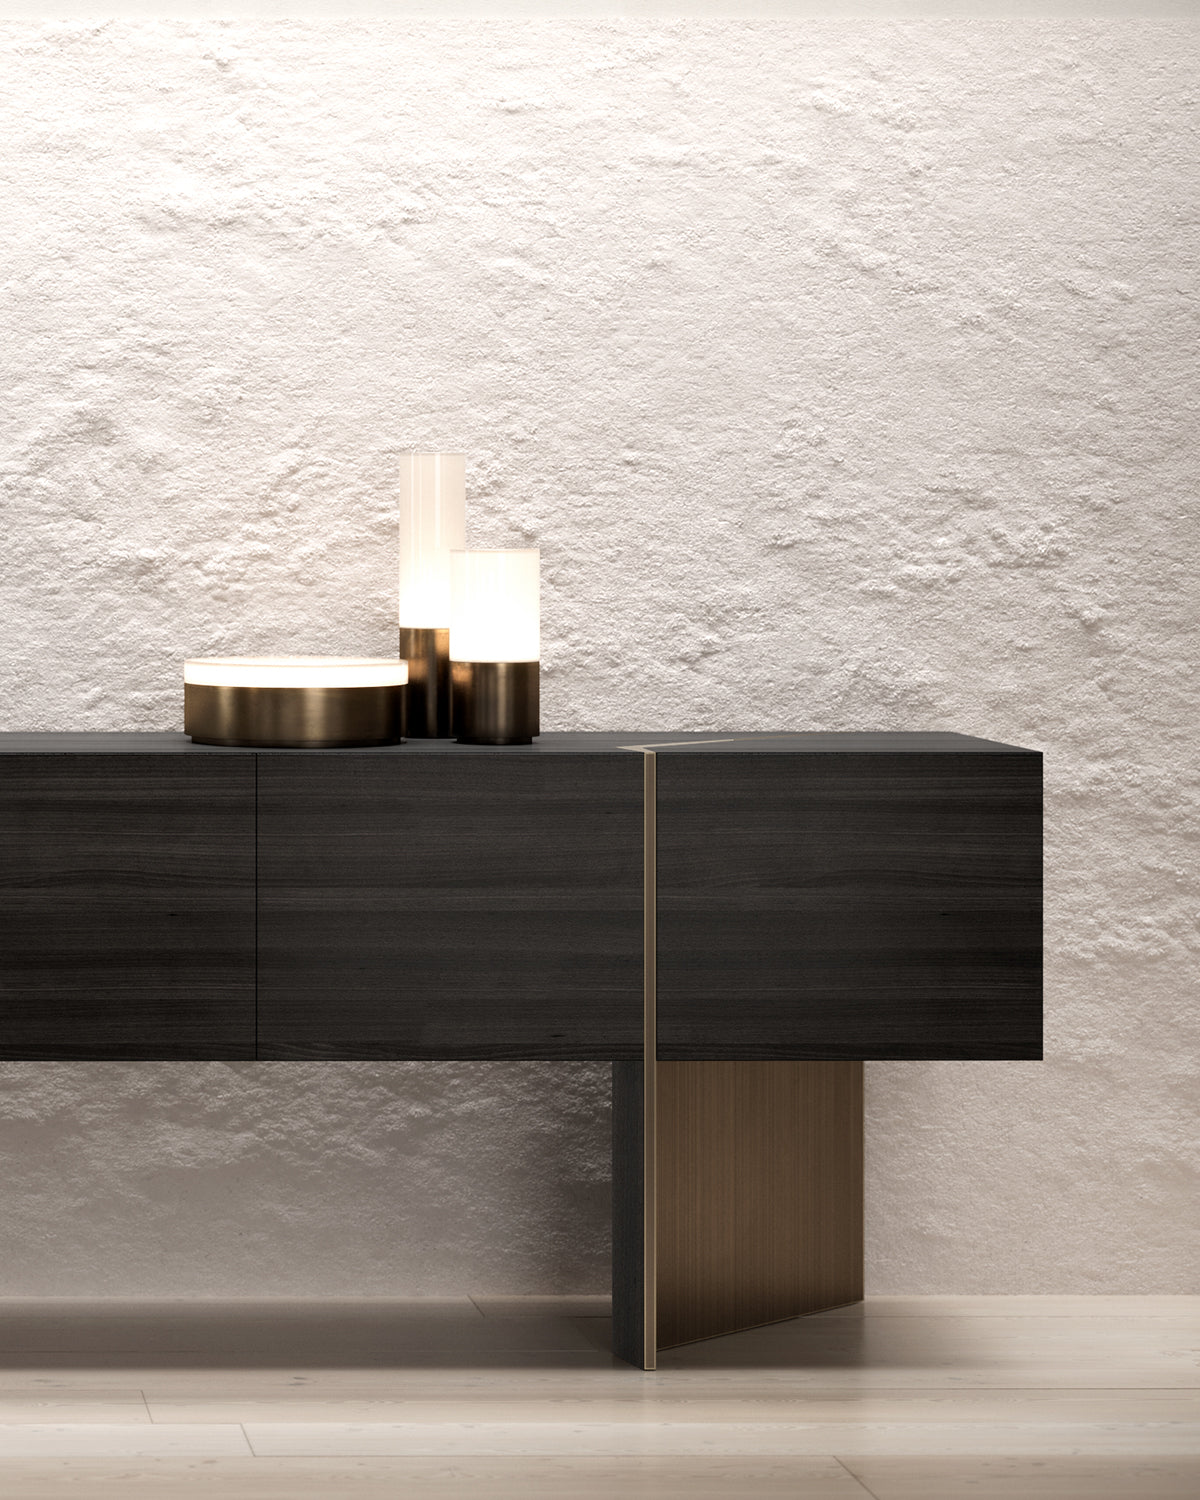 CYLENCE | Table lamp by Emmemobili